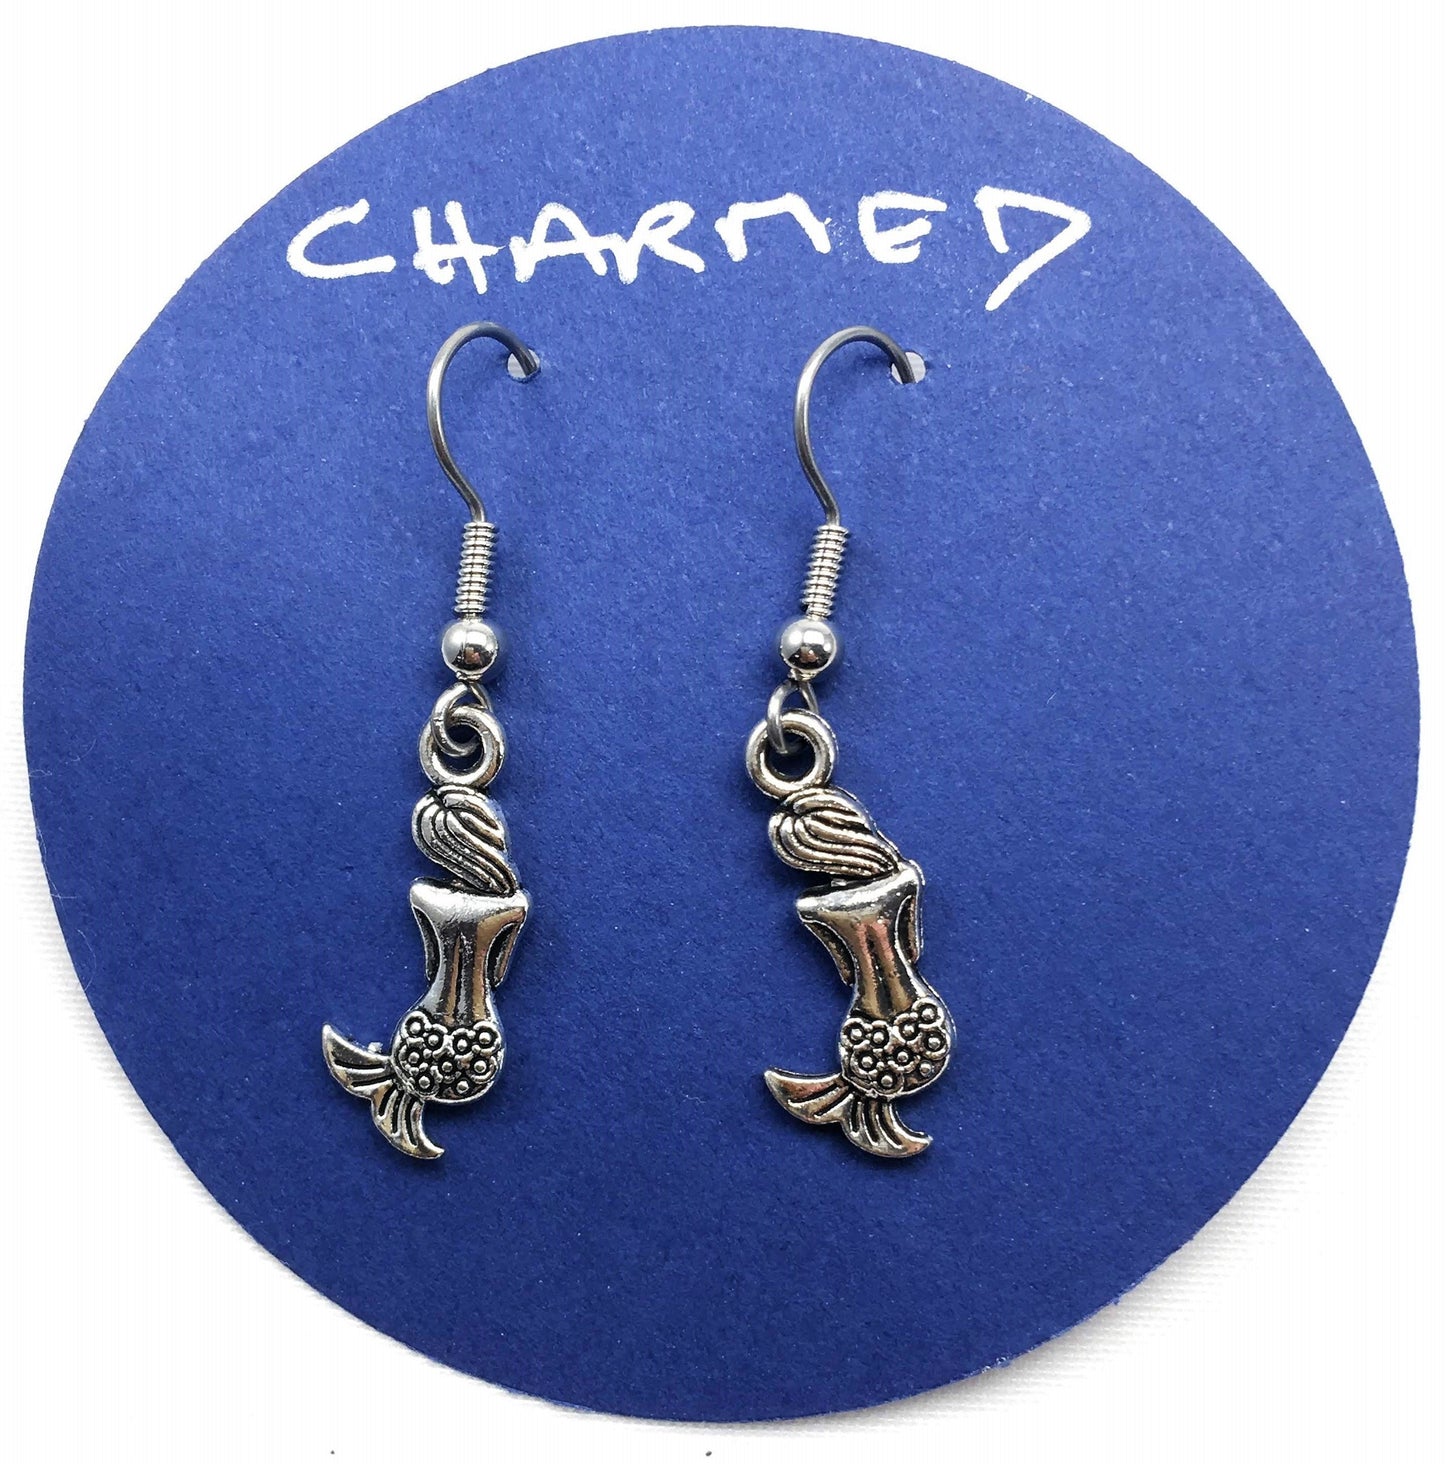 Charmed! Mermaid earrings silver plate antique finish on hypoallergenic surgical steel hooks